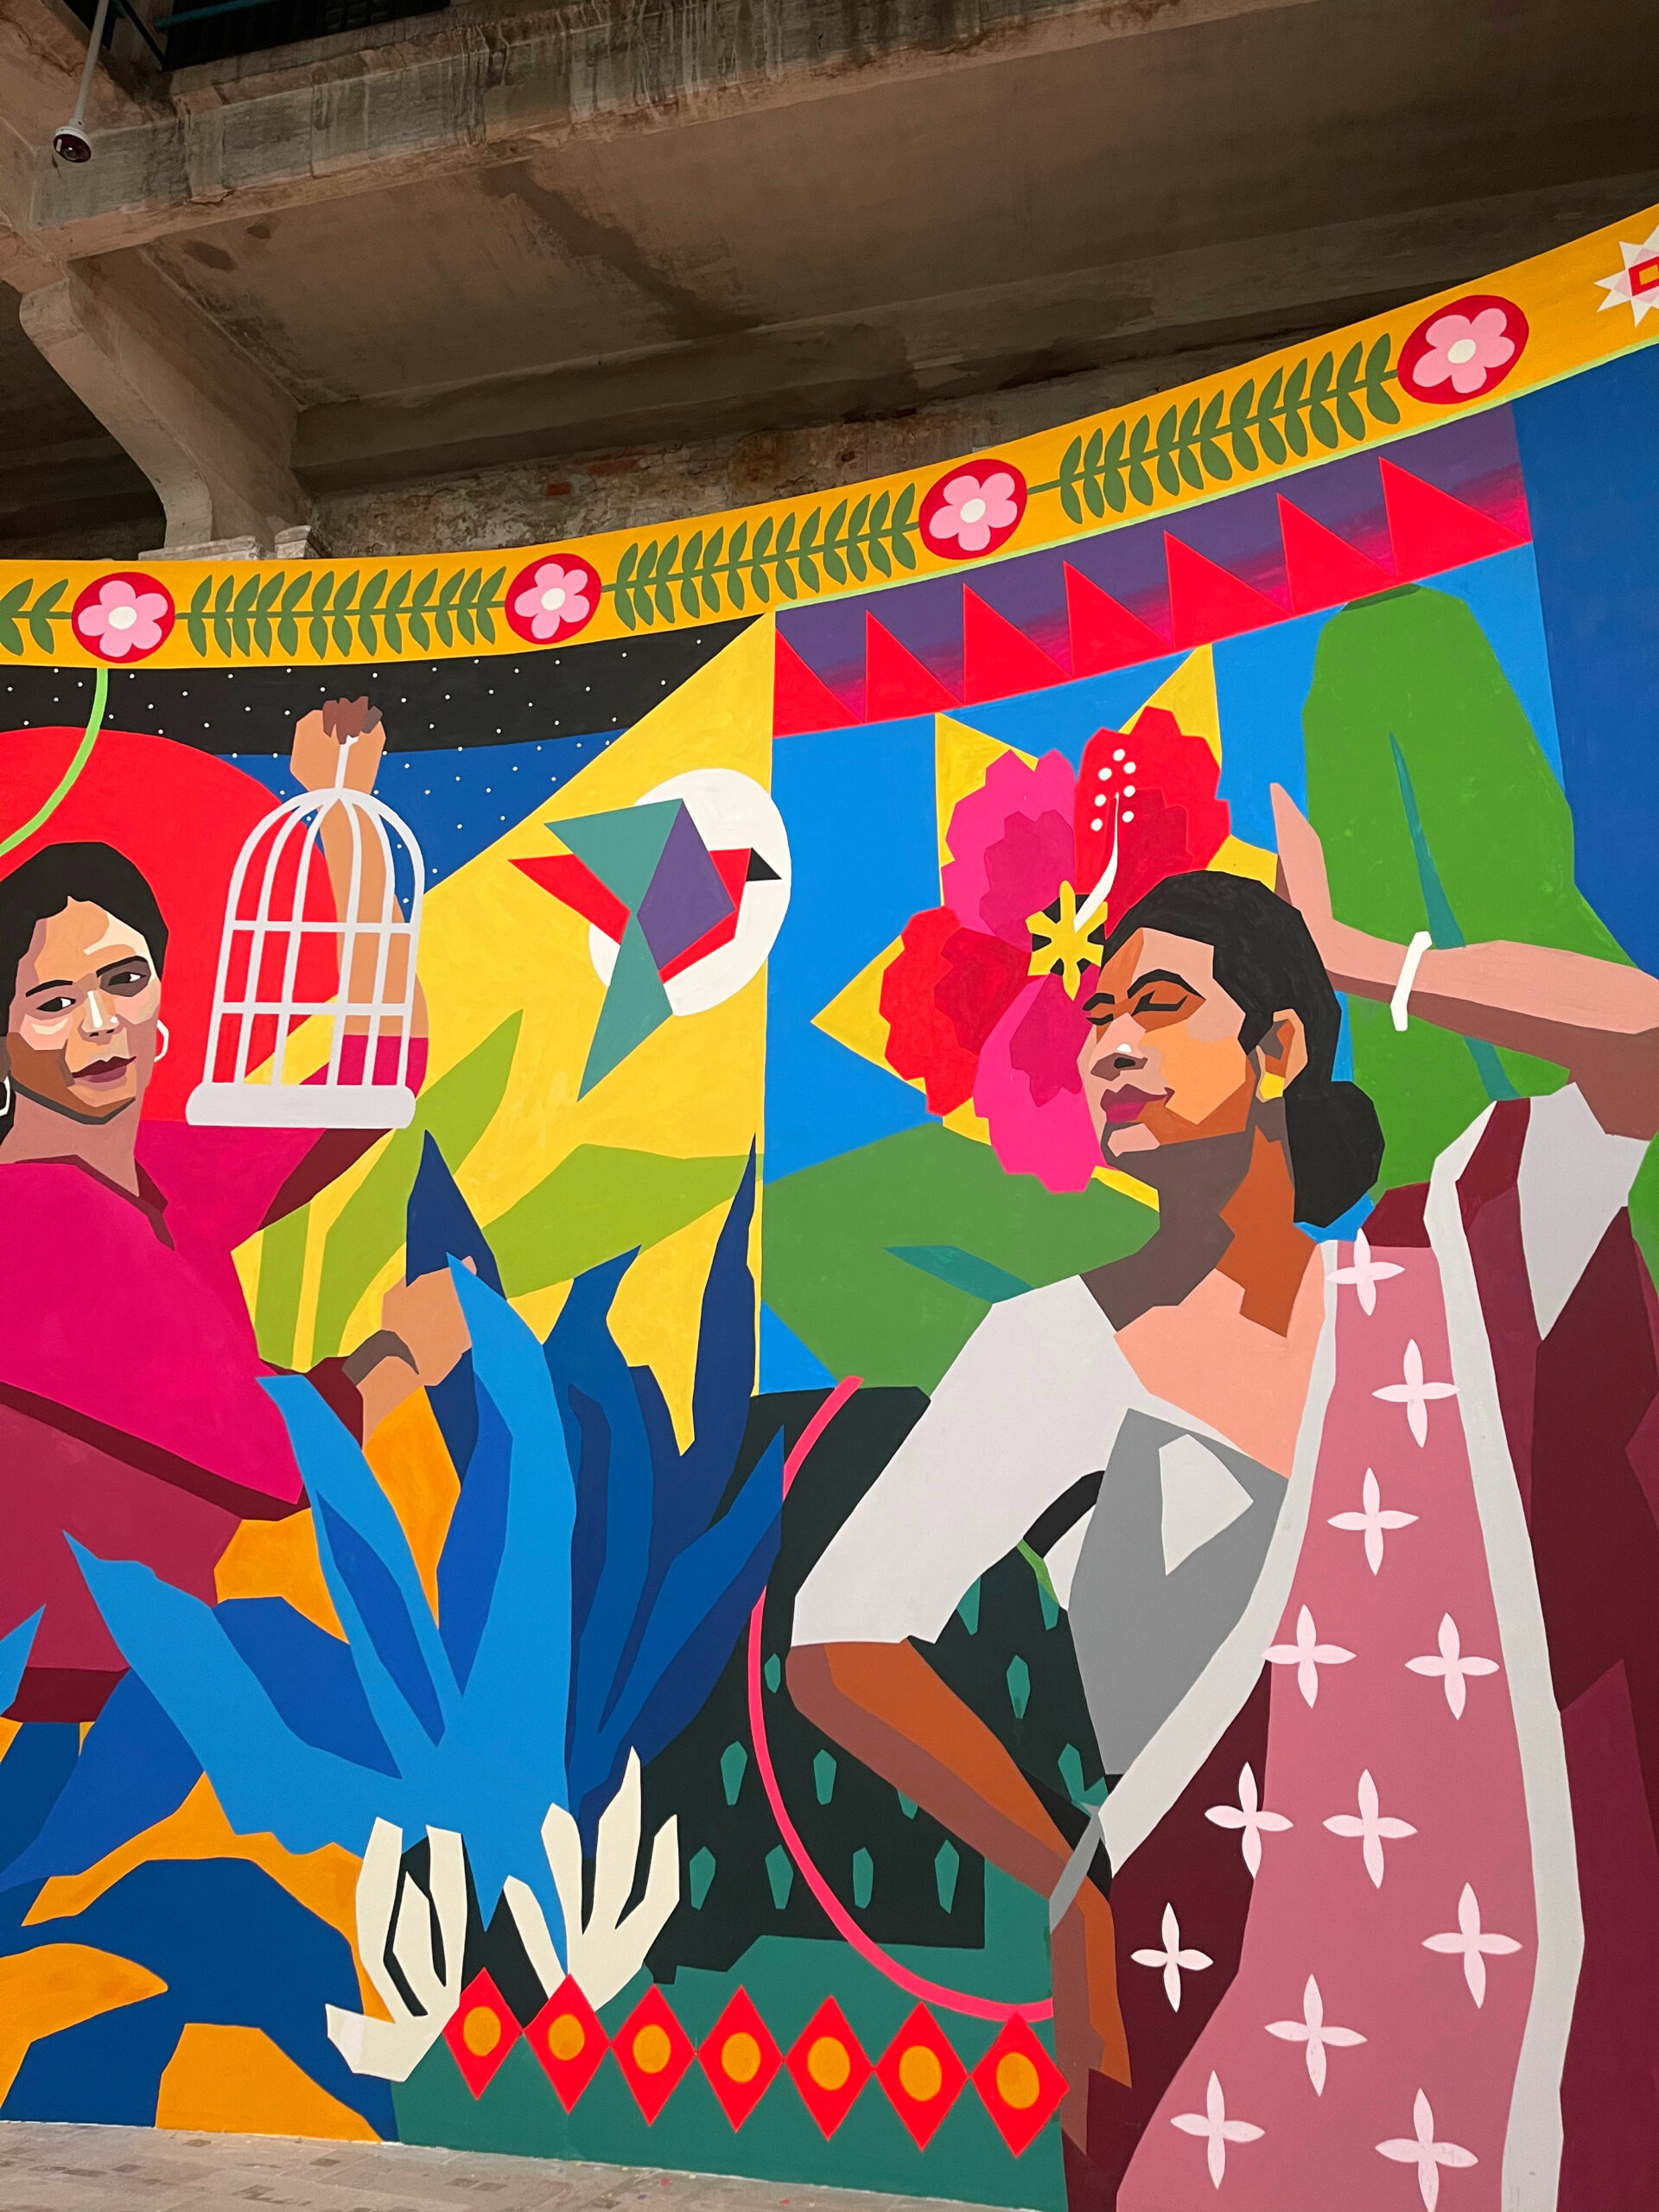 a large painted mural celebrating the trans community in india. it's painted in blod block colours and looks like an illustration of a transperson dancing in a sari and one holding a  birdcage